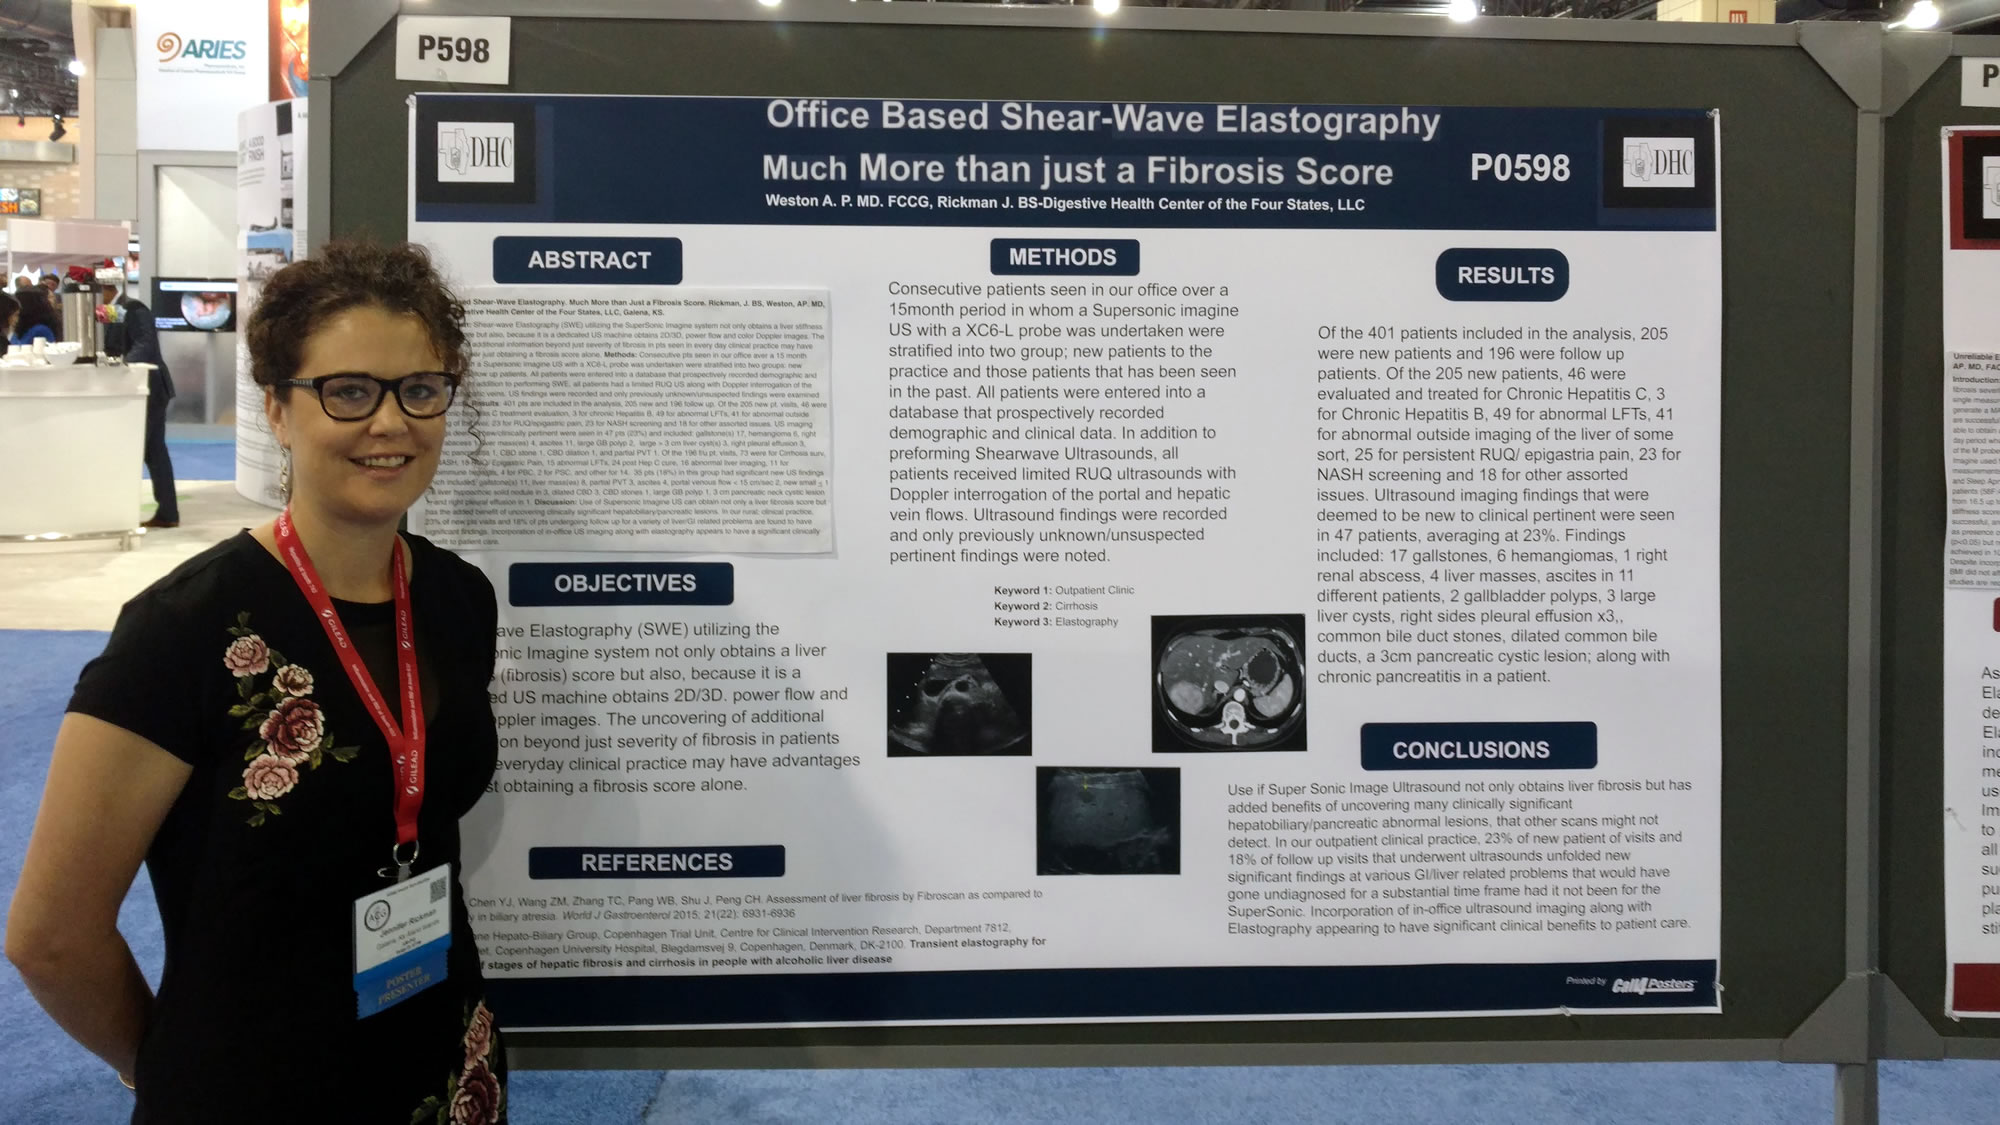 Office Based Shear-Wave Elastography, Much More than just a Fibrosis Score